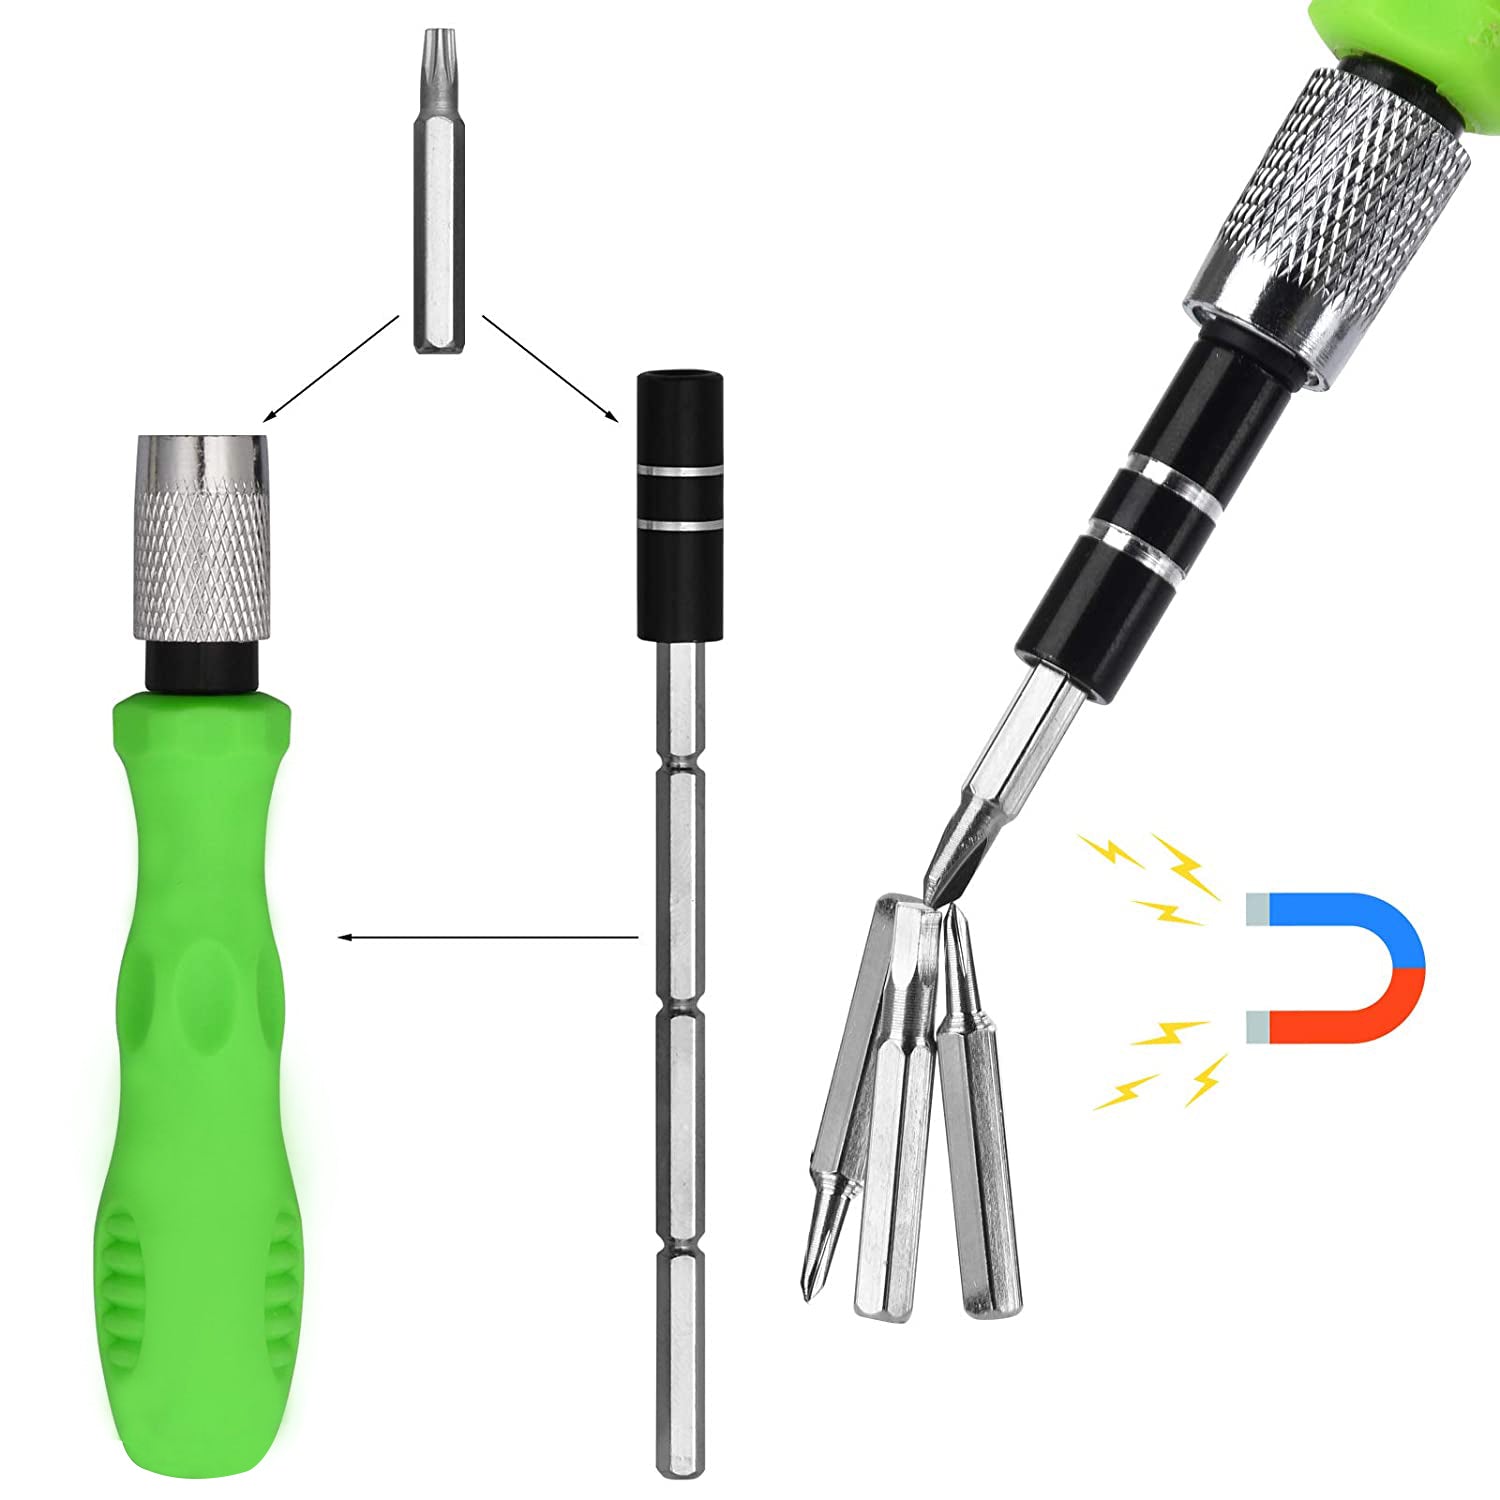 32-in-1 Mini Screwdriver Bits Set with Magnetic Flexible Extension Rod